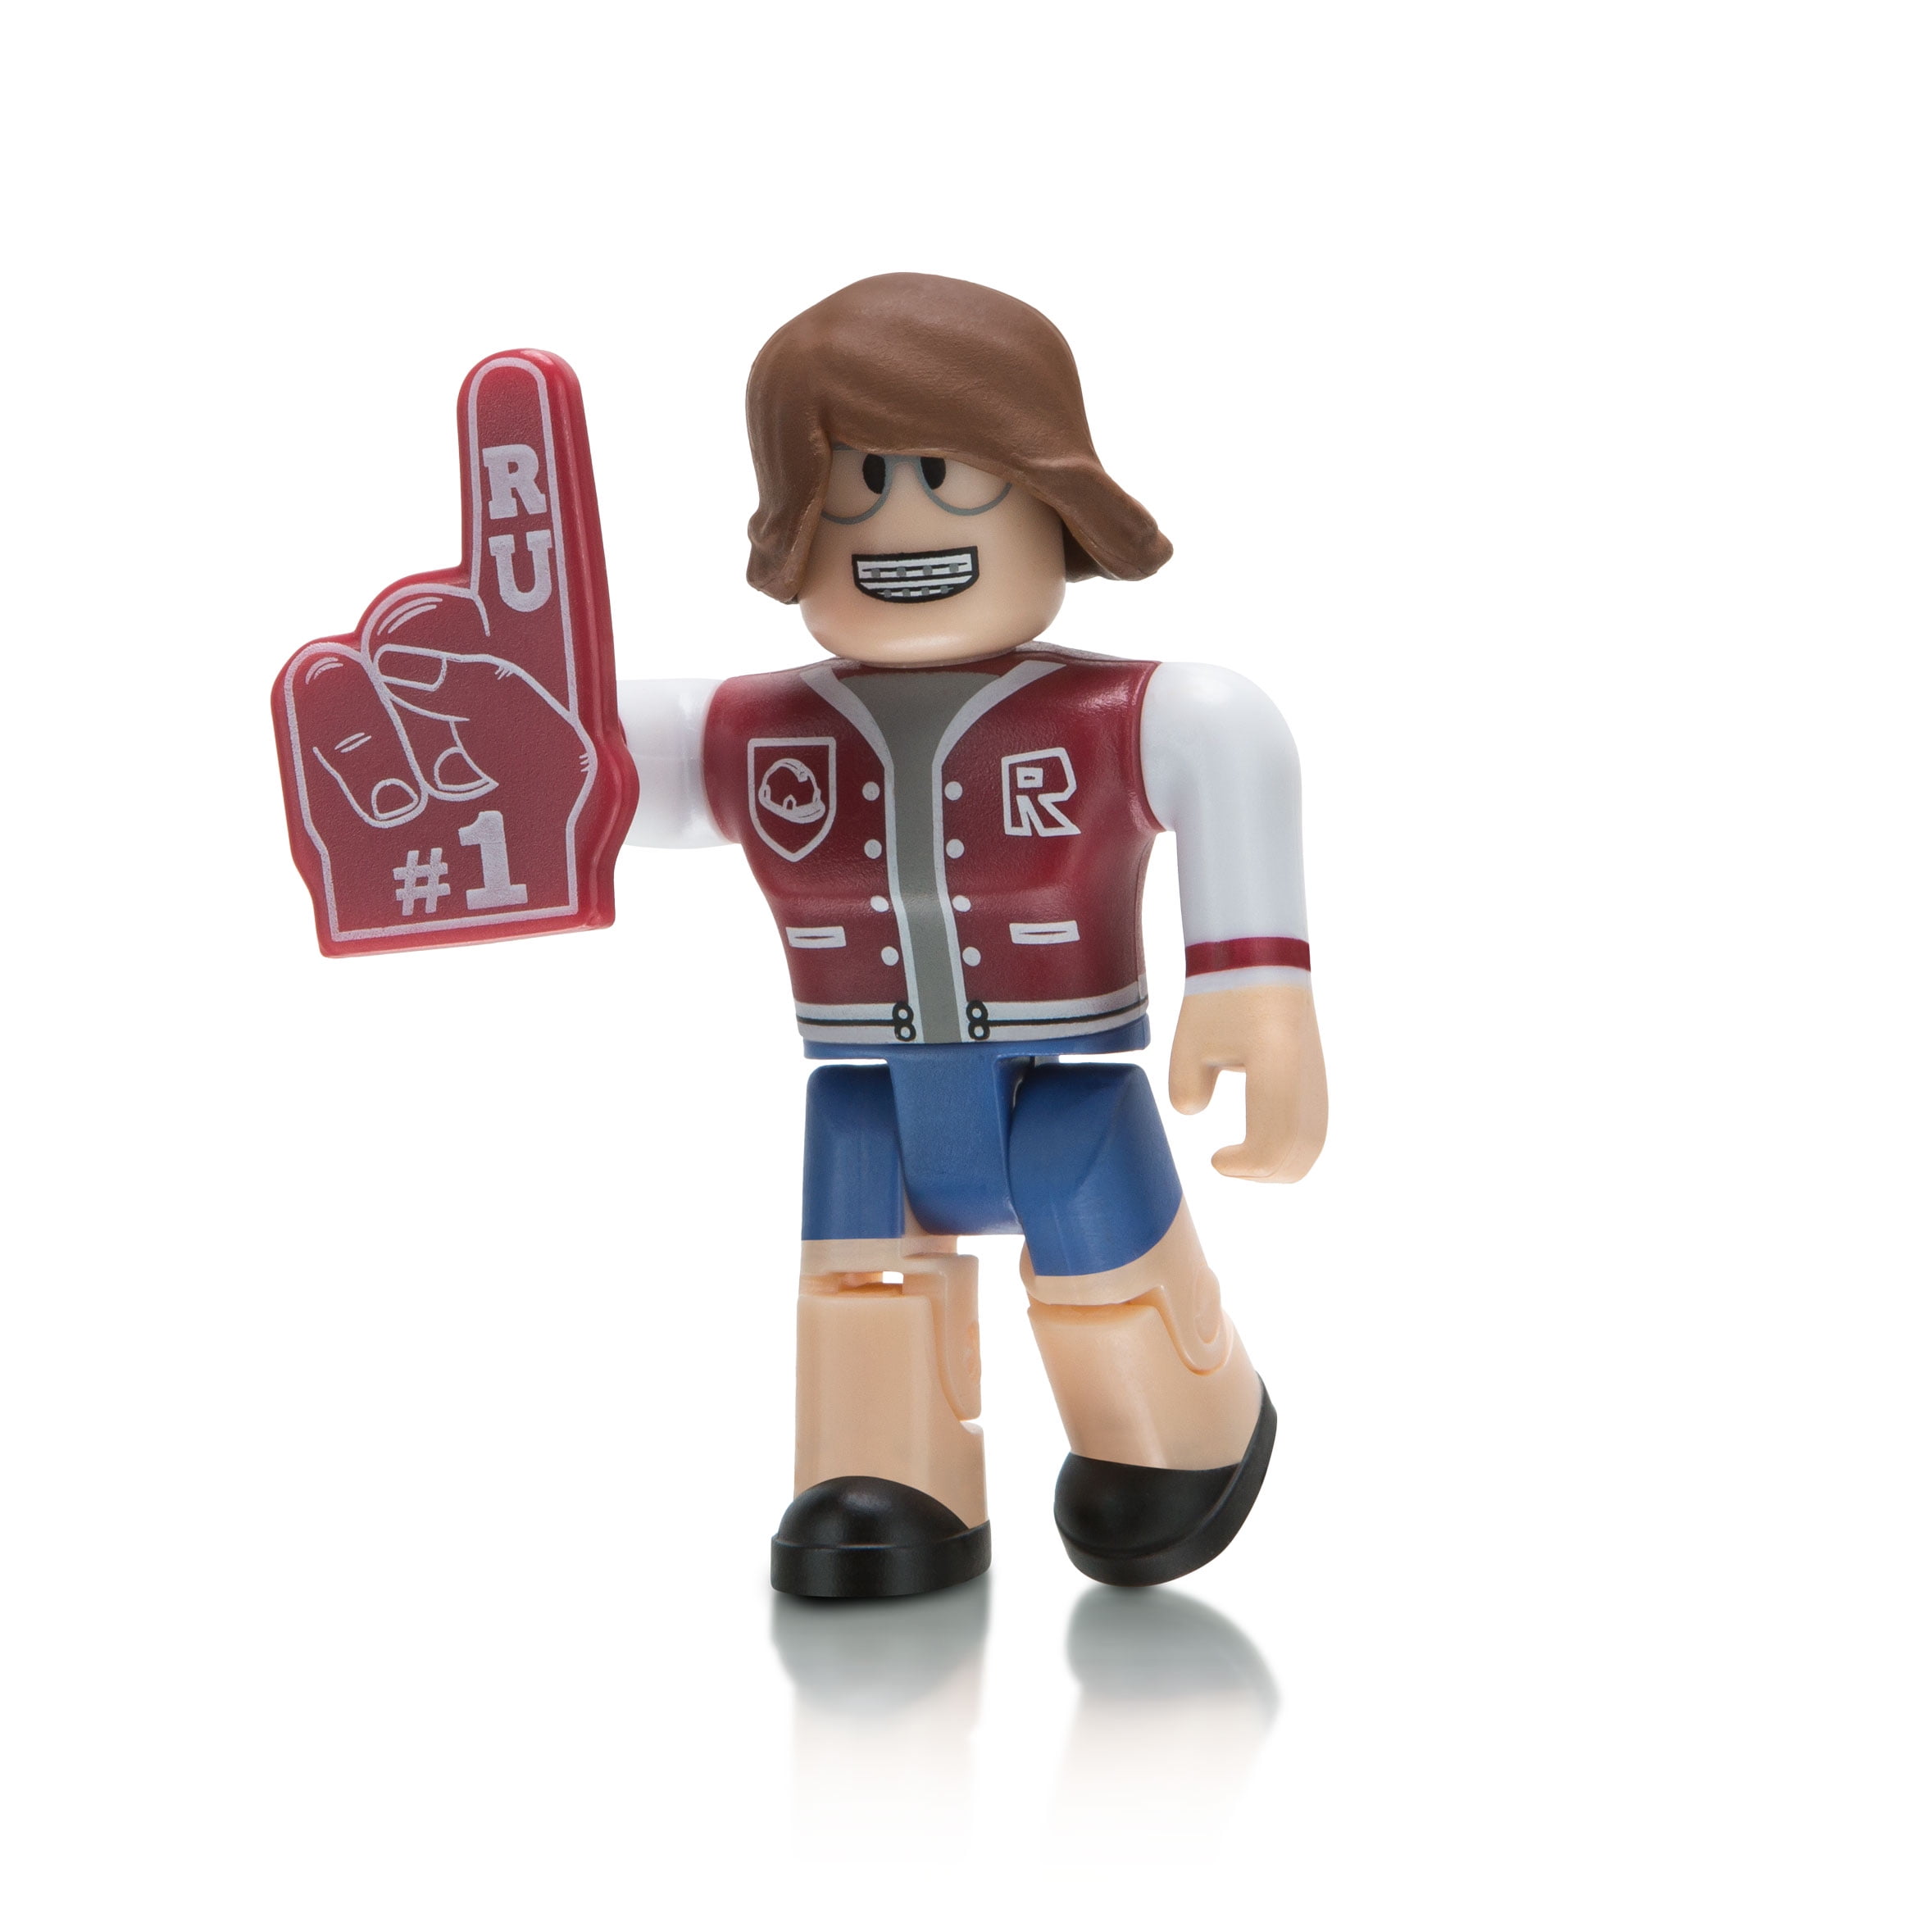 Roblox Celebrity Collection Series 1 Mystery Figure Includes 1 Figure Exclusive Virtual Item Walmart Com Walmart Com - roblox celebrity mystery figure 6 pack series 1